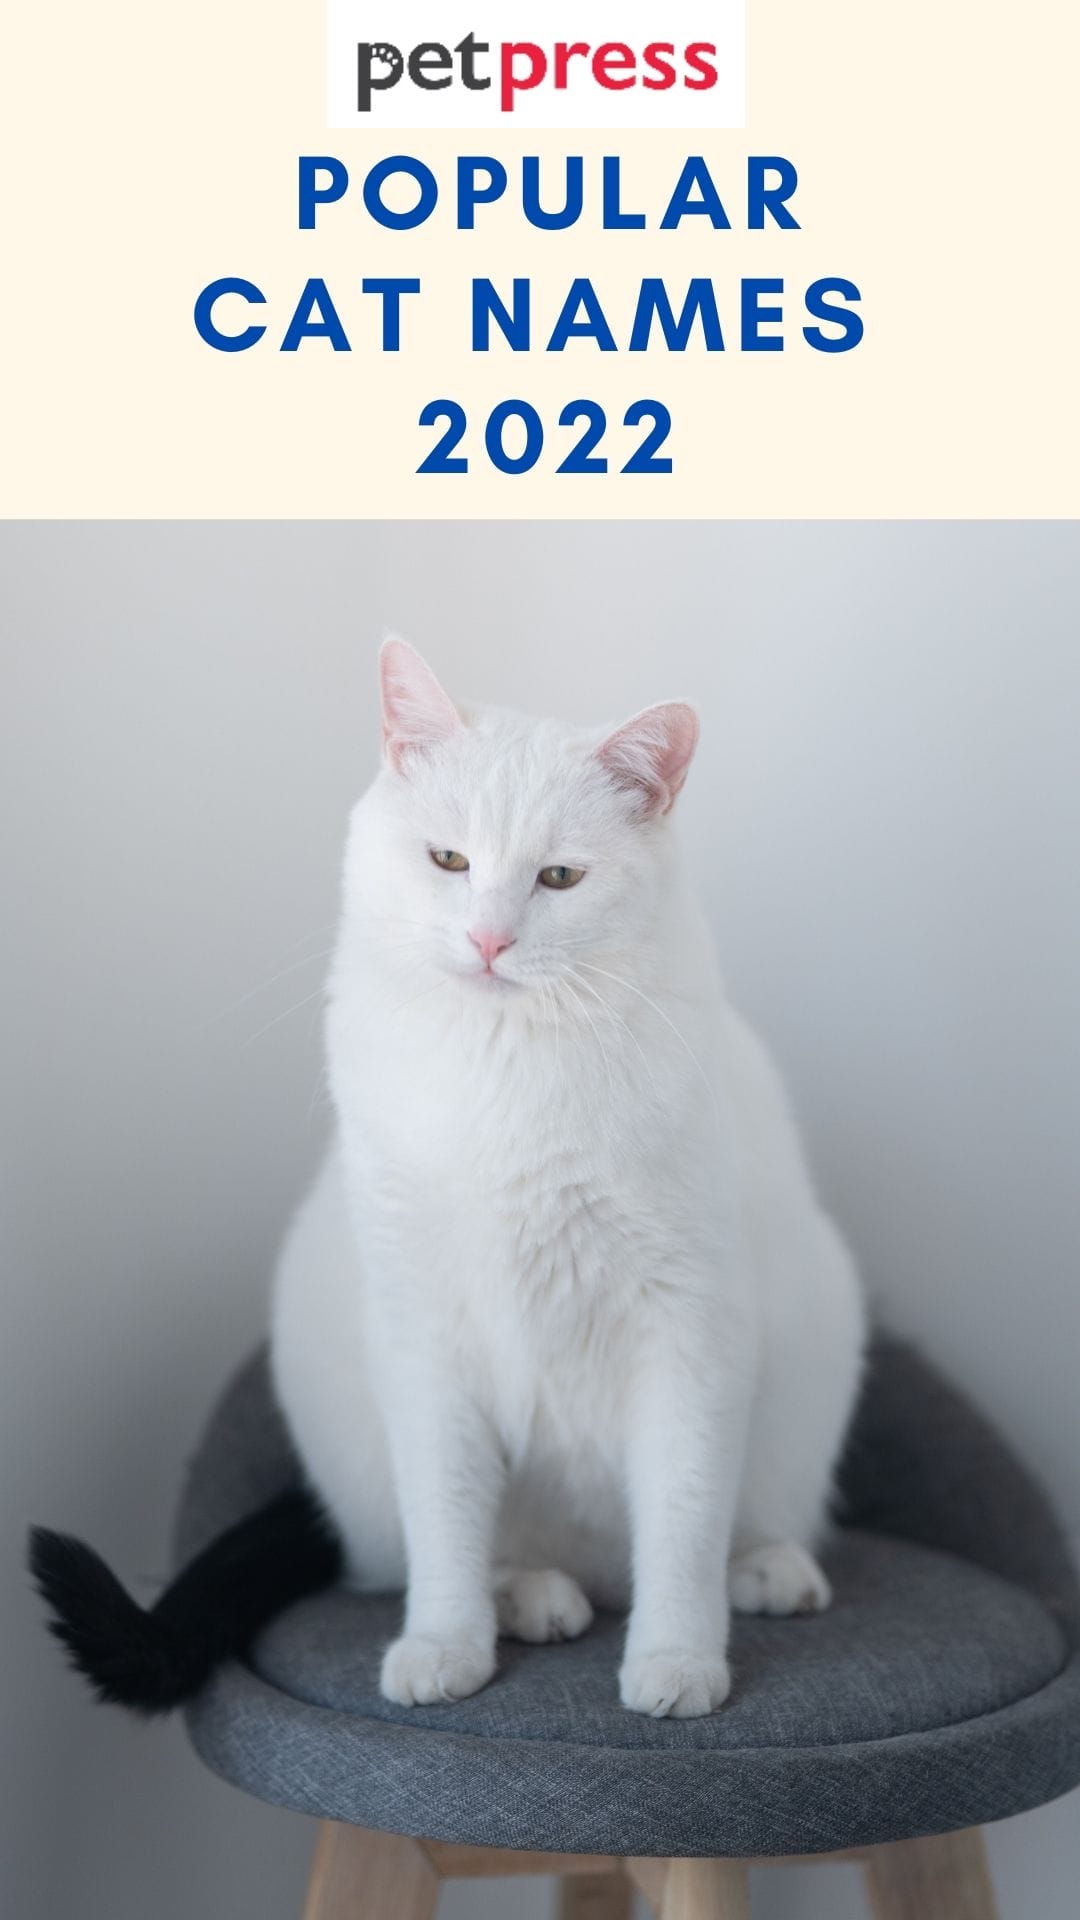 Popular Cat Names 2022 All Over The World That Will Inspire You